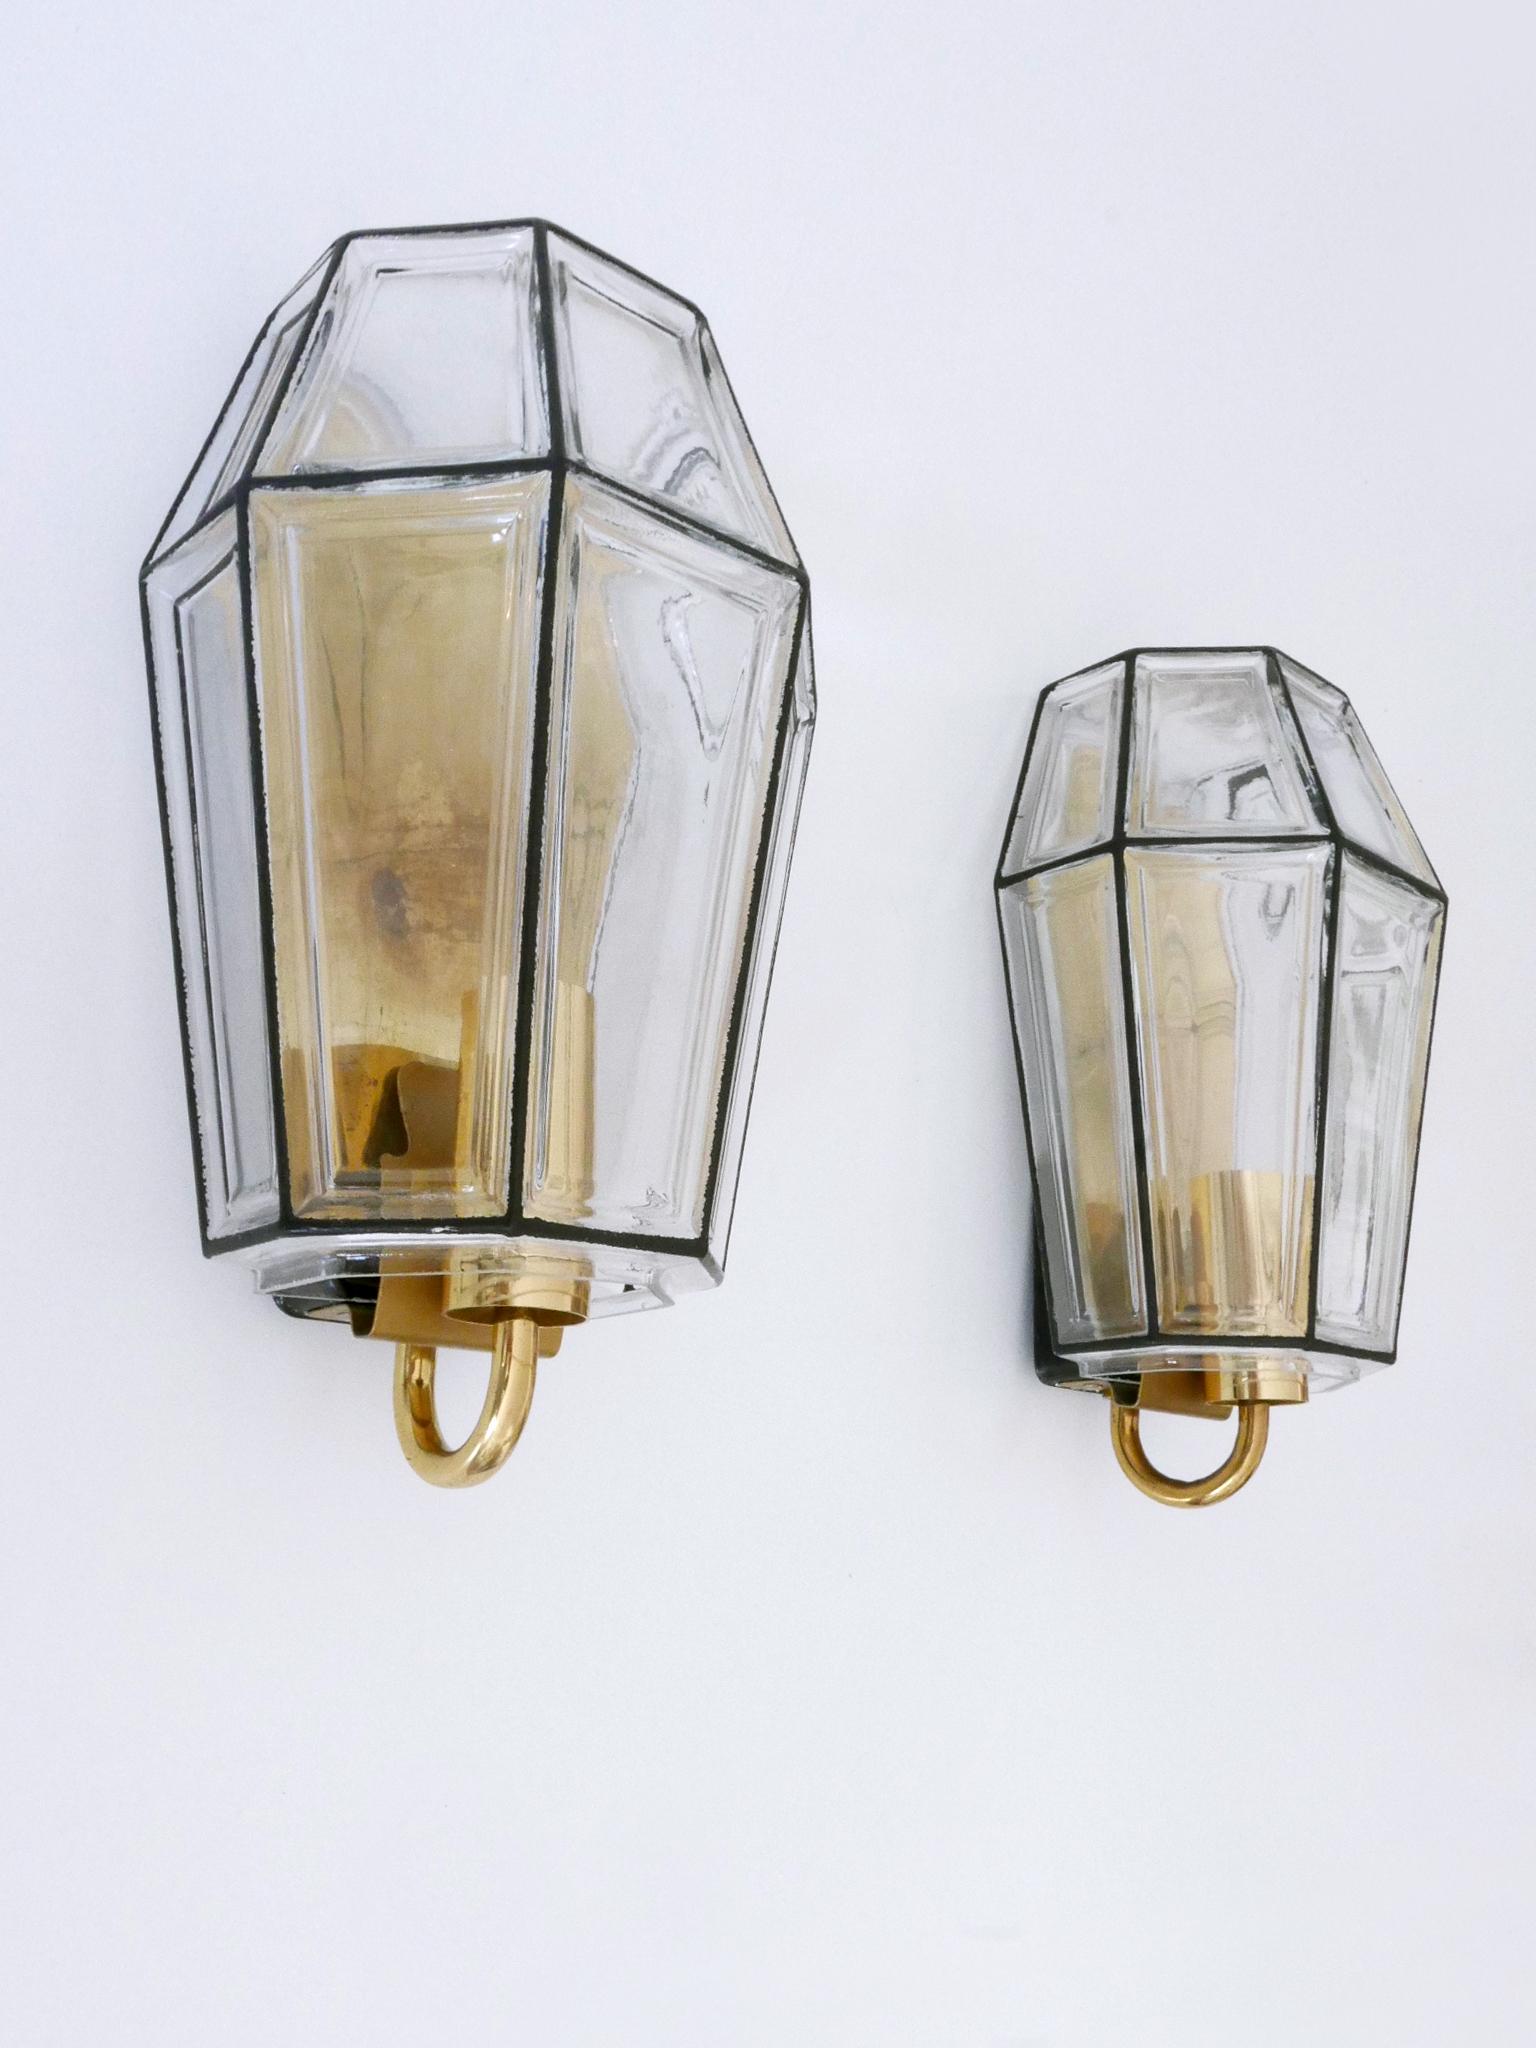 Set of Two Mid-Century Modern Sconces or Wall Fixtures by Glashütte Limburg For Sale 3